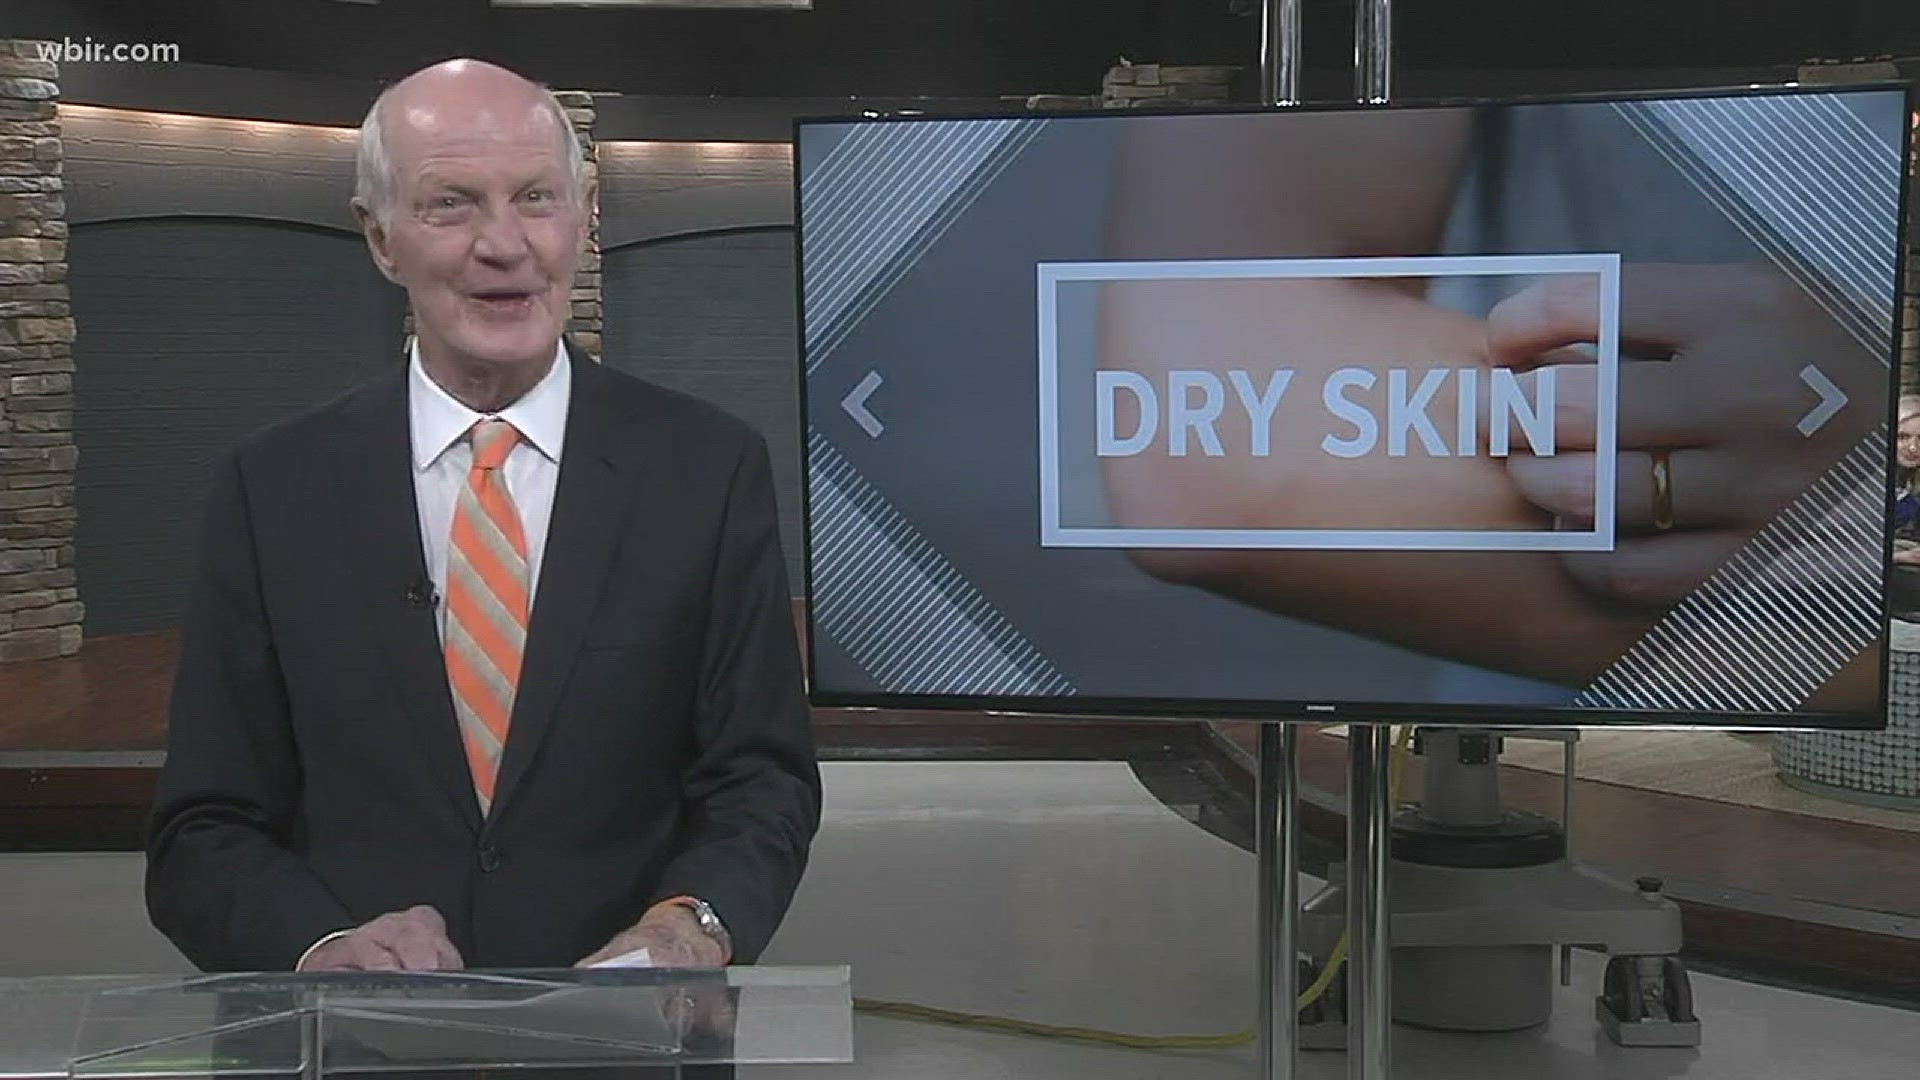 Dr. Bob is here to discuss taking care of dry winter skin!